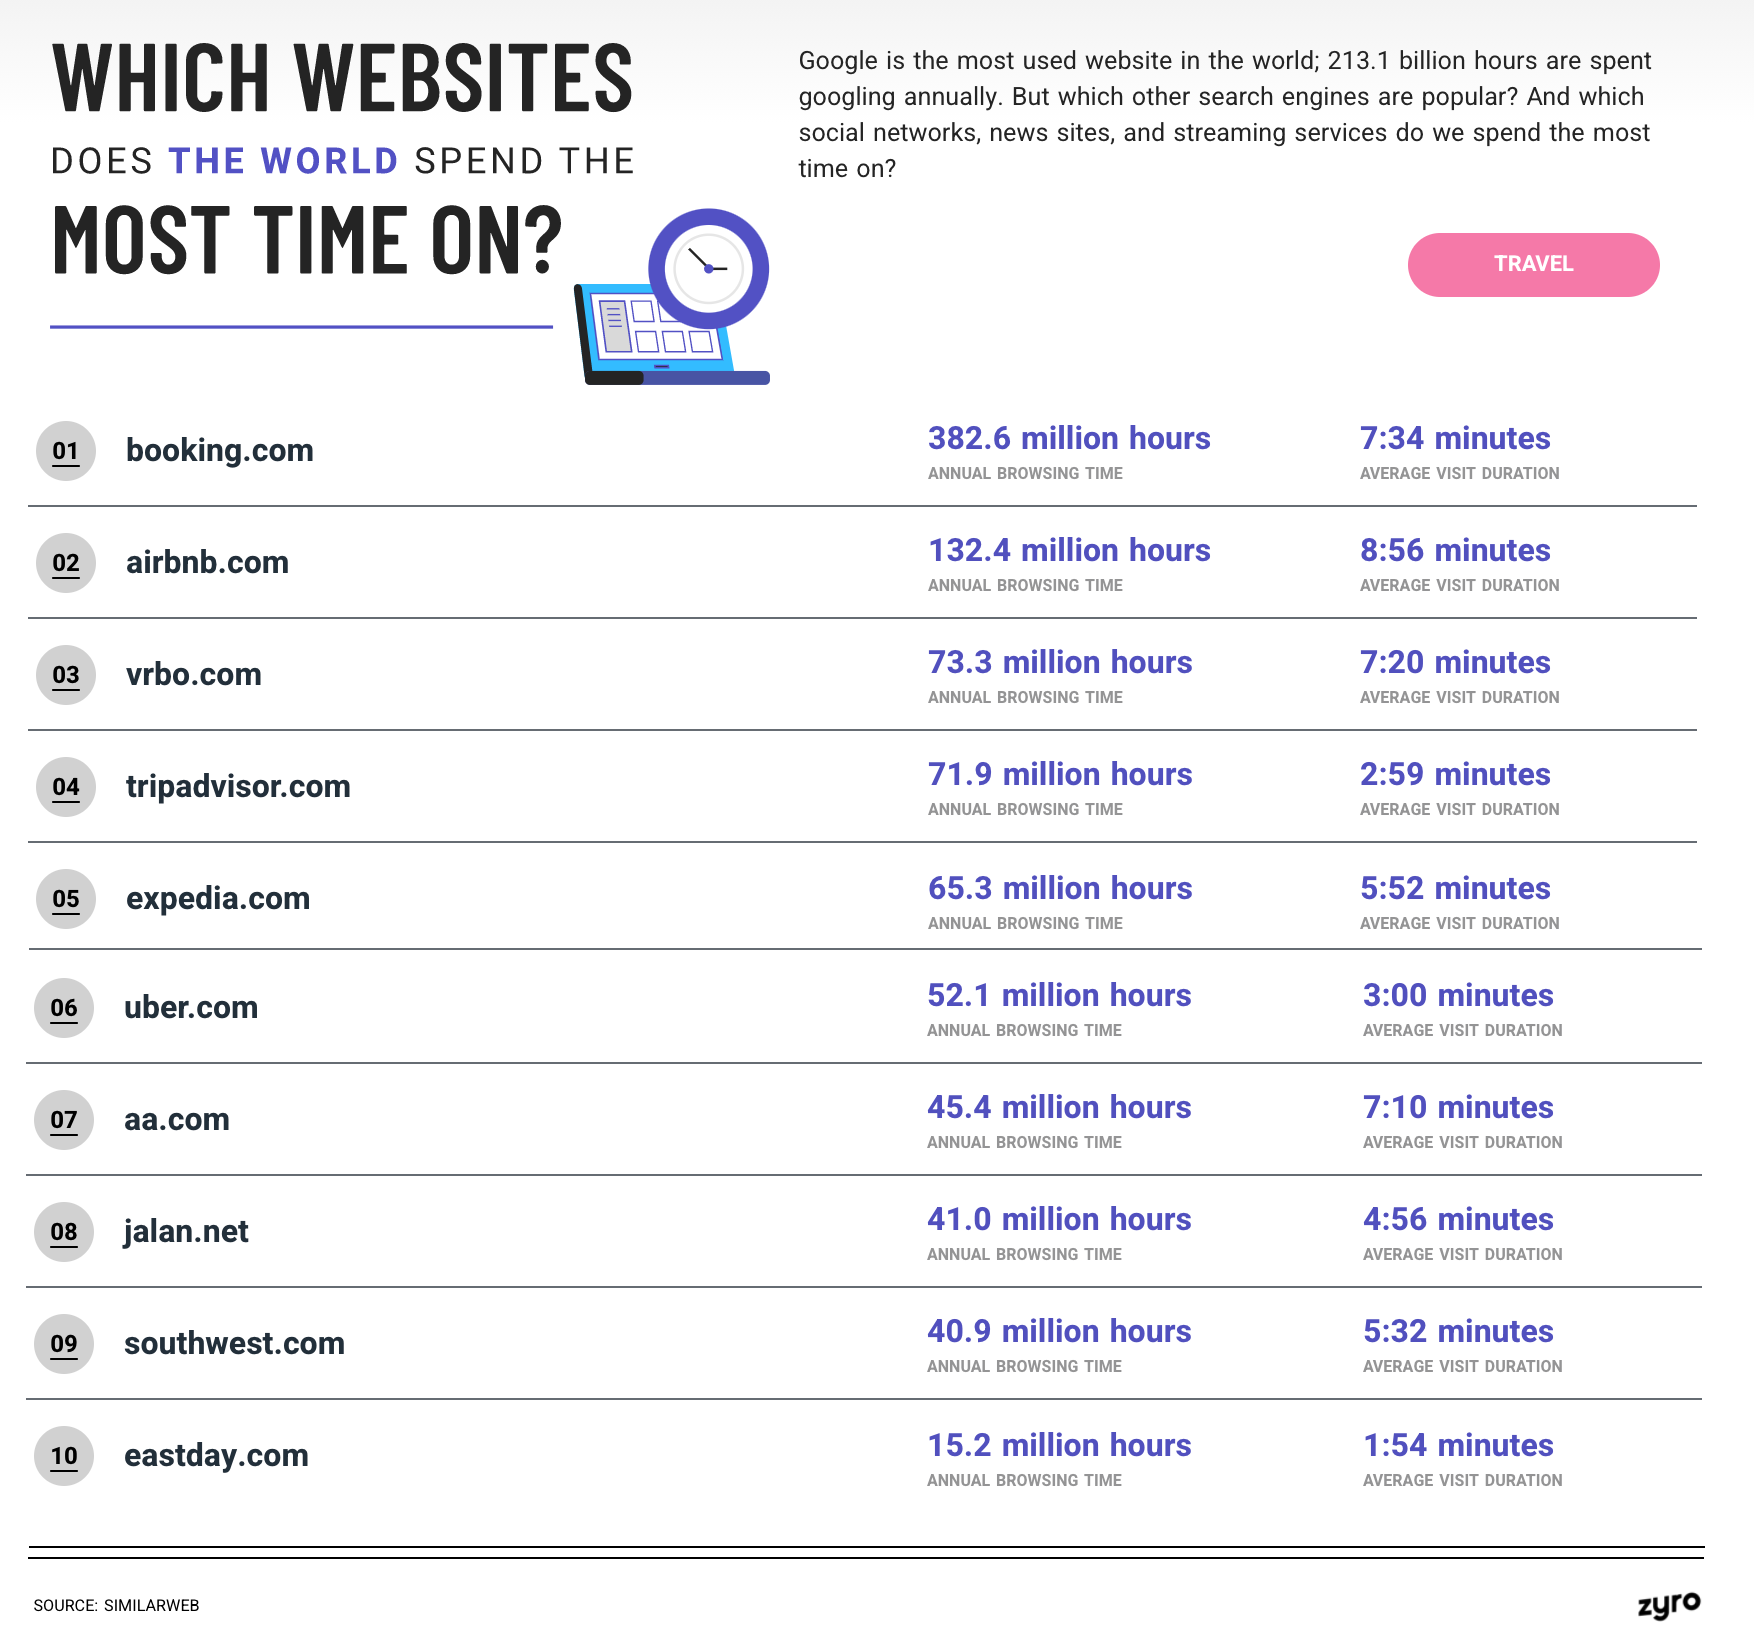 Which Travel Websites Does the World Spend the Most Time On?